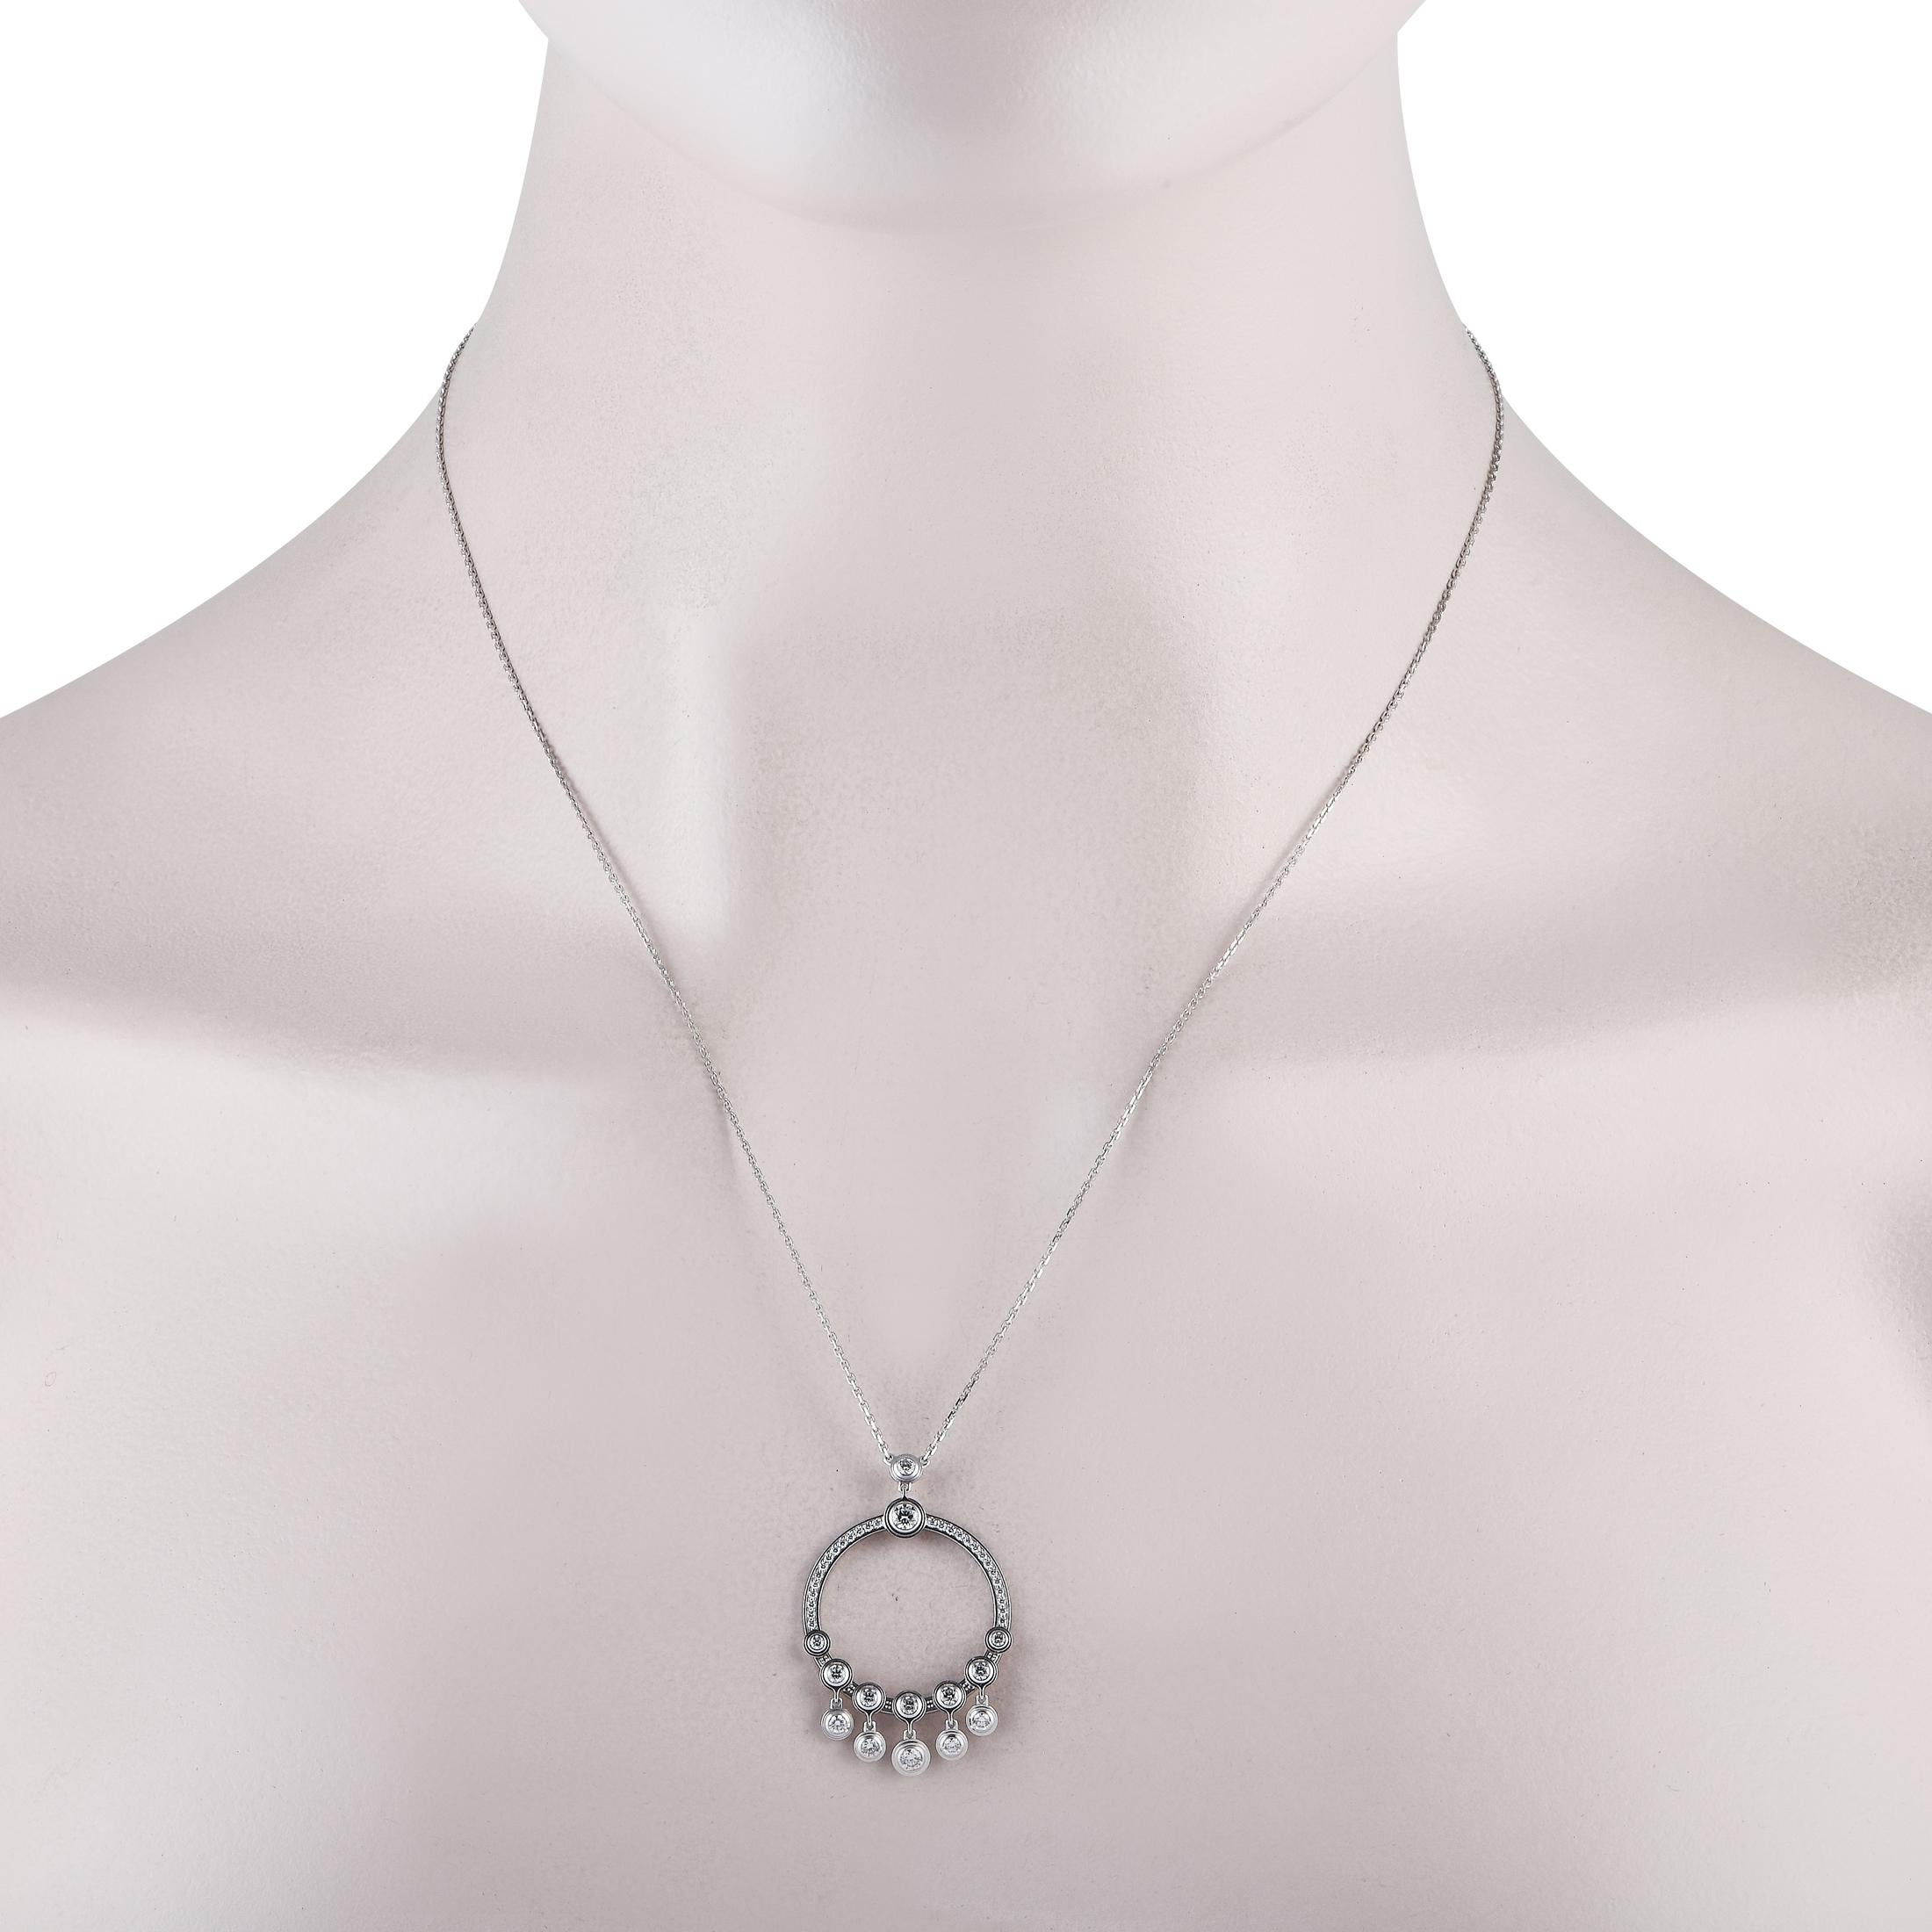 A glittering jewel to round out your looks. This Cartier necklace in 18K white gold features a hoop pendant traced with diamonds. The bottom half of the ring features more diamonds in bezel setting plus five more dangling bezel-set diamonds. The